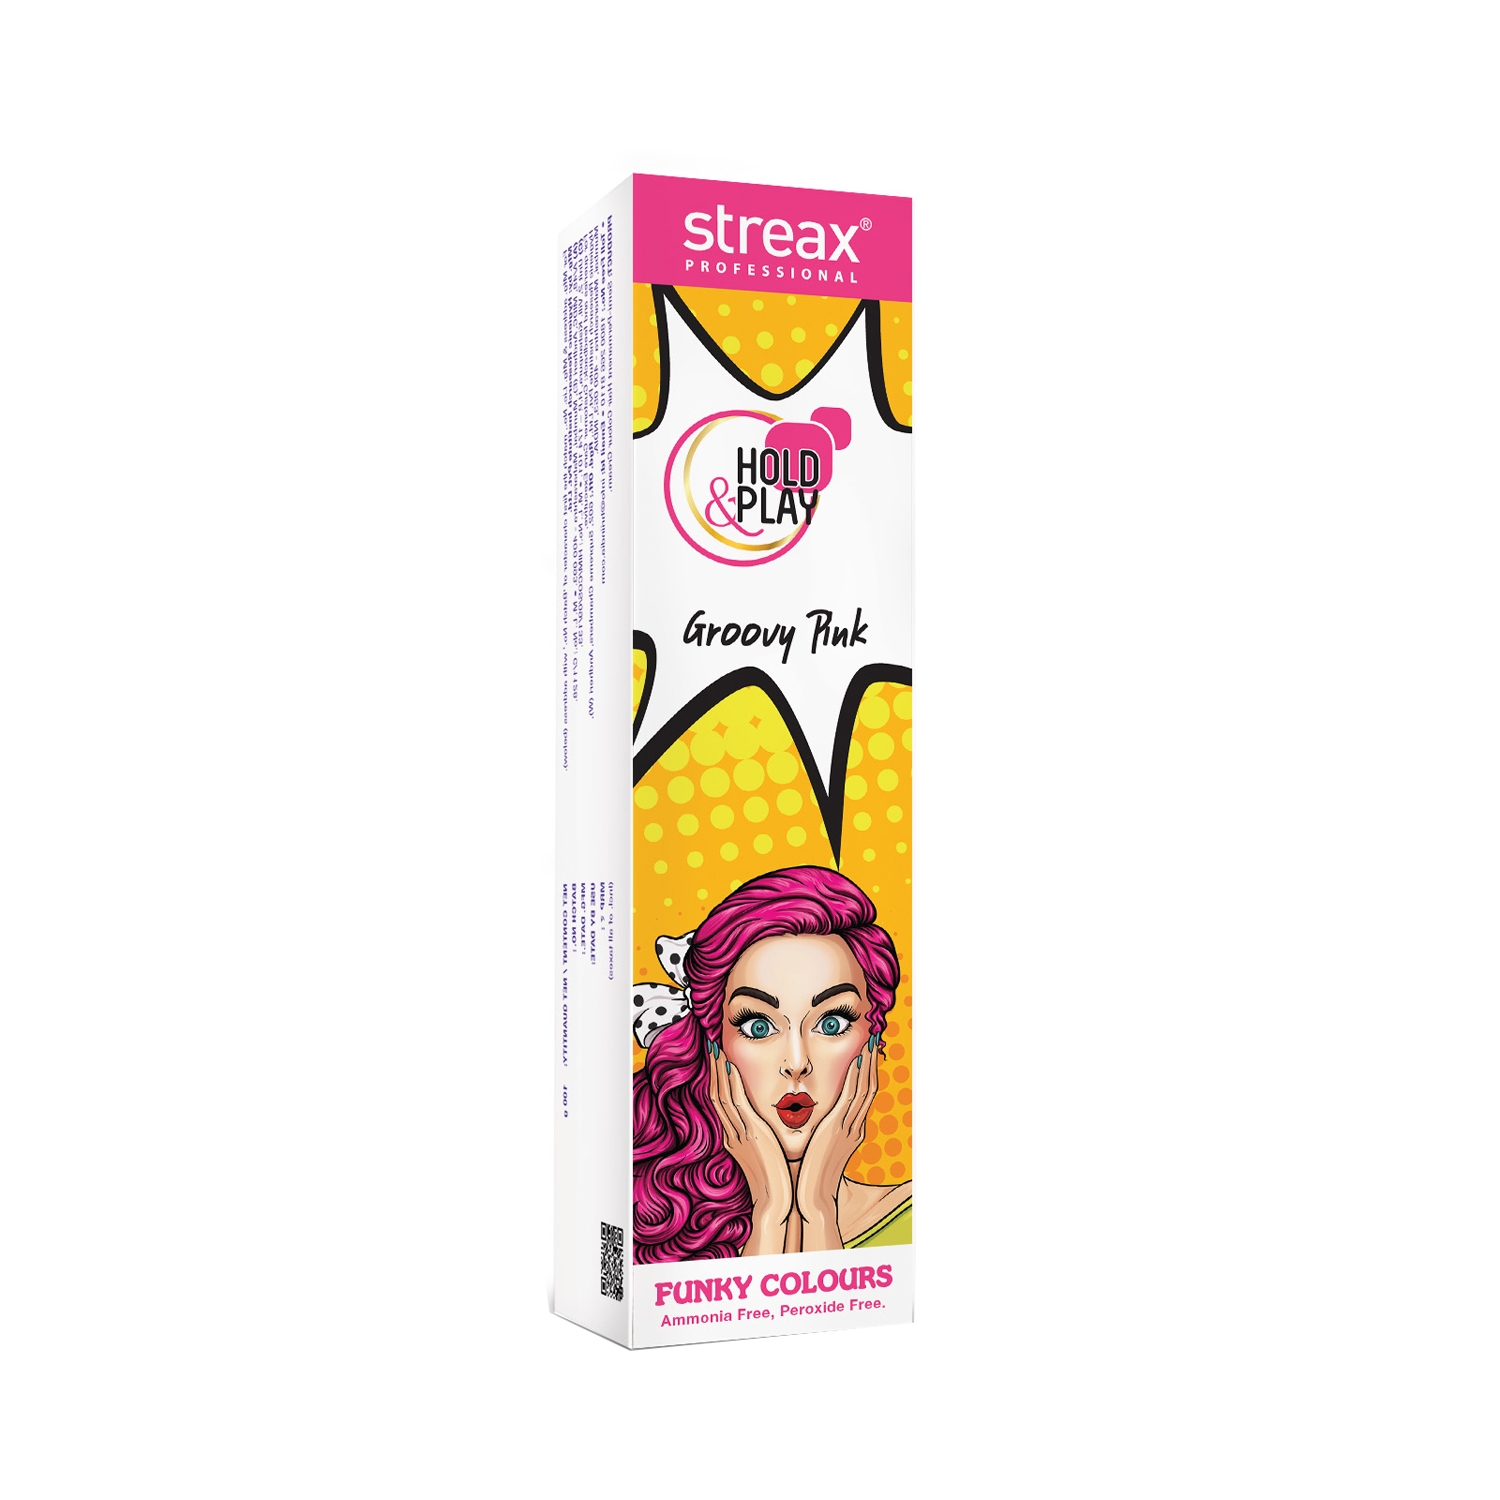 Streax Professional Hold & Play Funky Hair Color - Groovy Pink (100g)